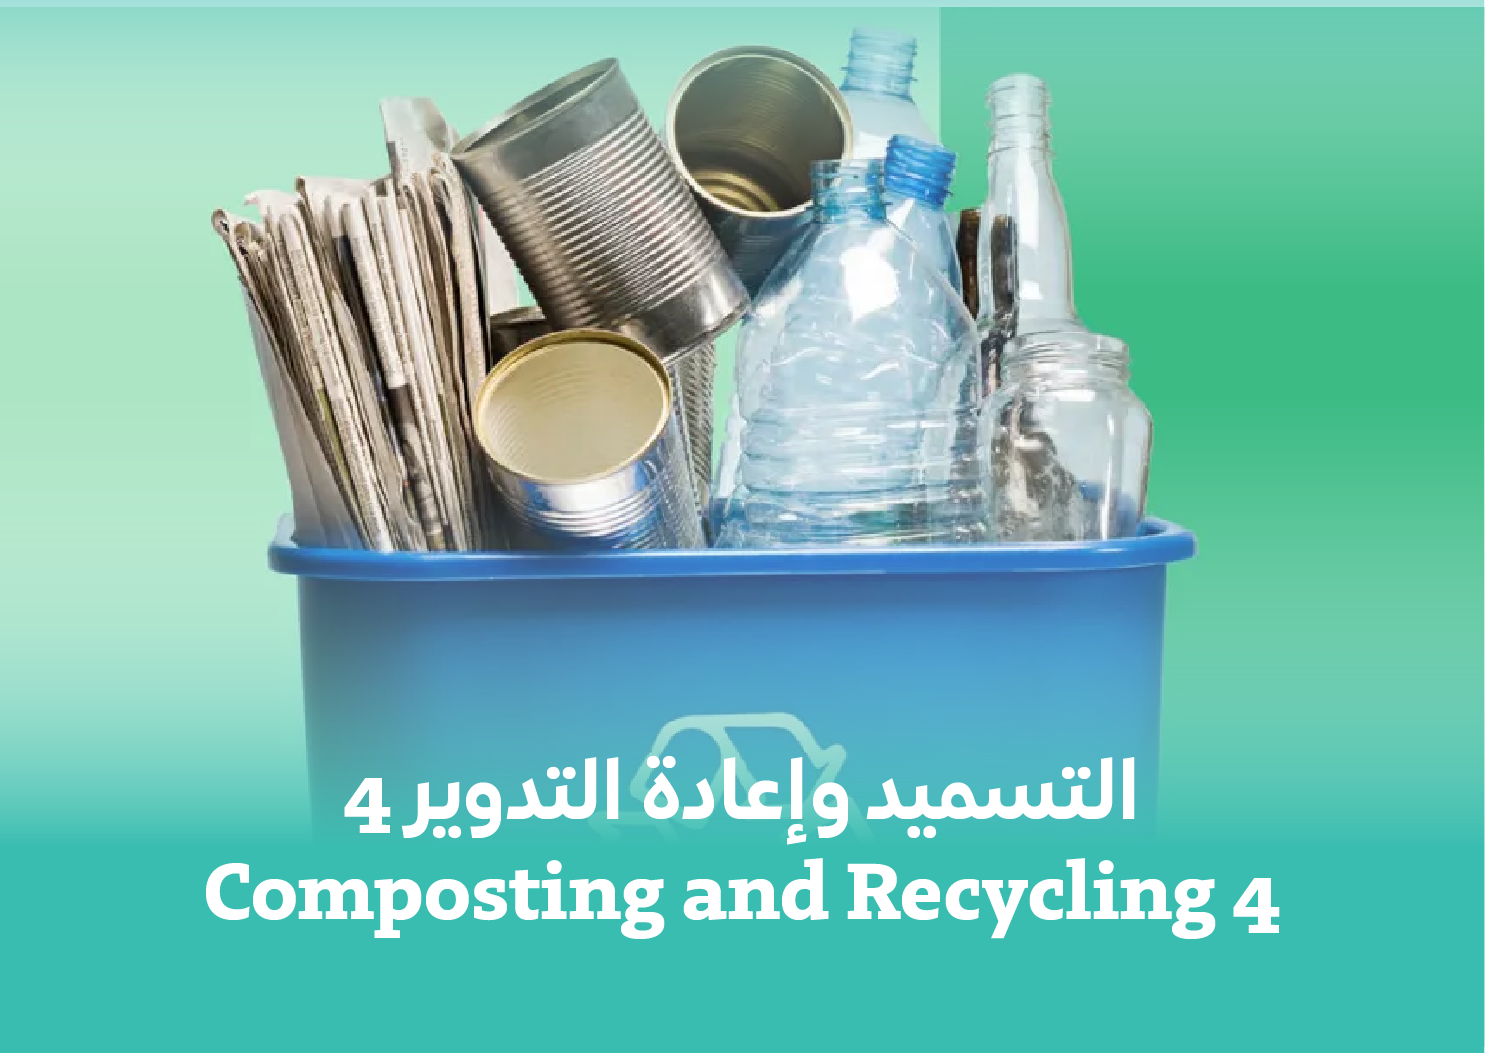 Composting and Recycling 4